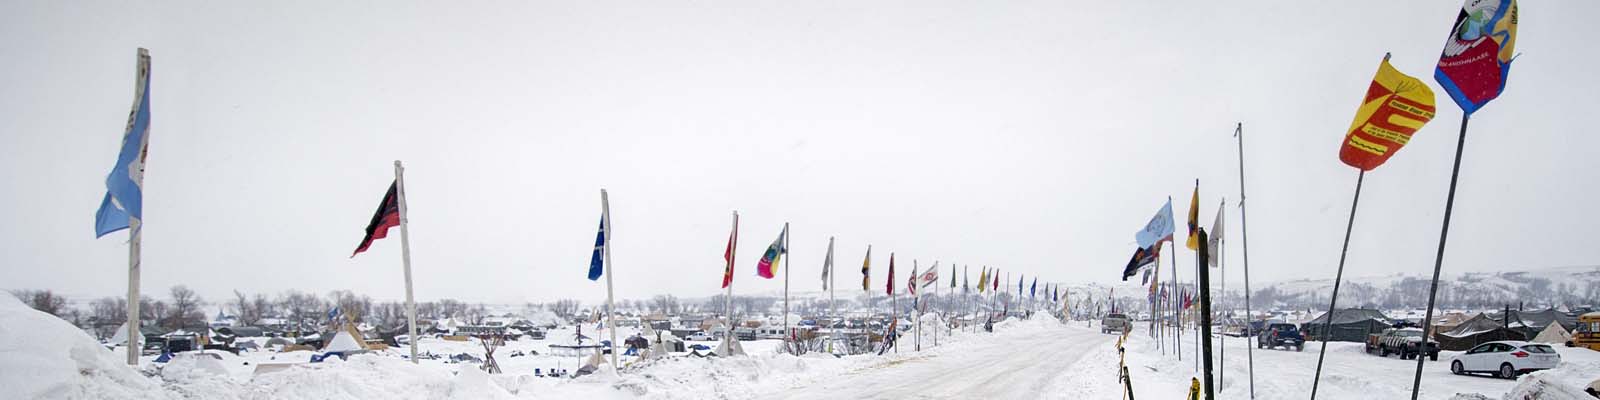 PIctured: A snowy road with flags in North Dakota.